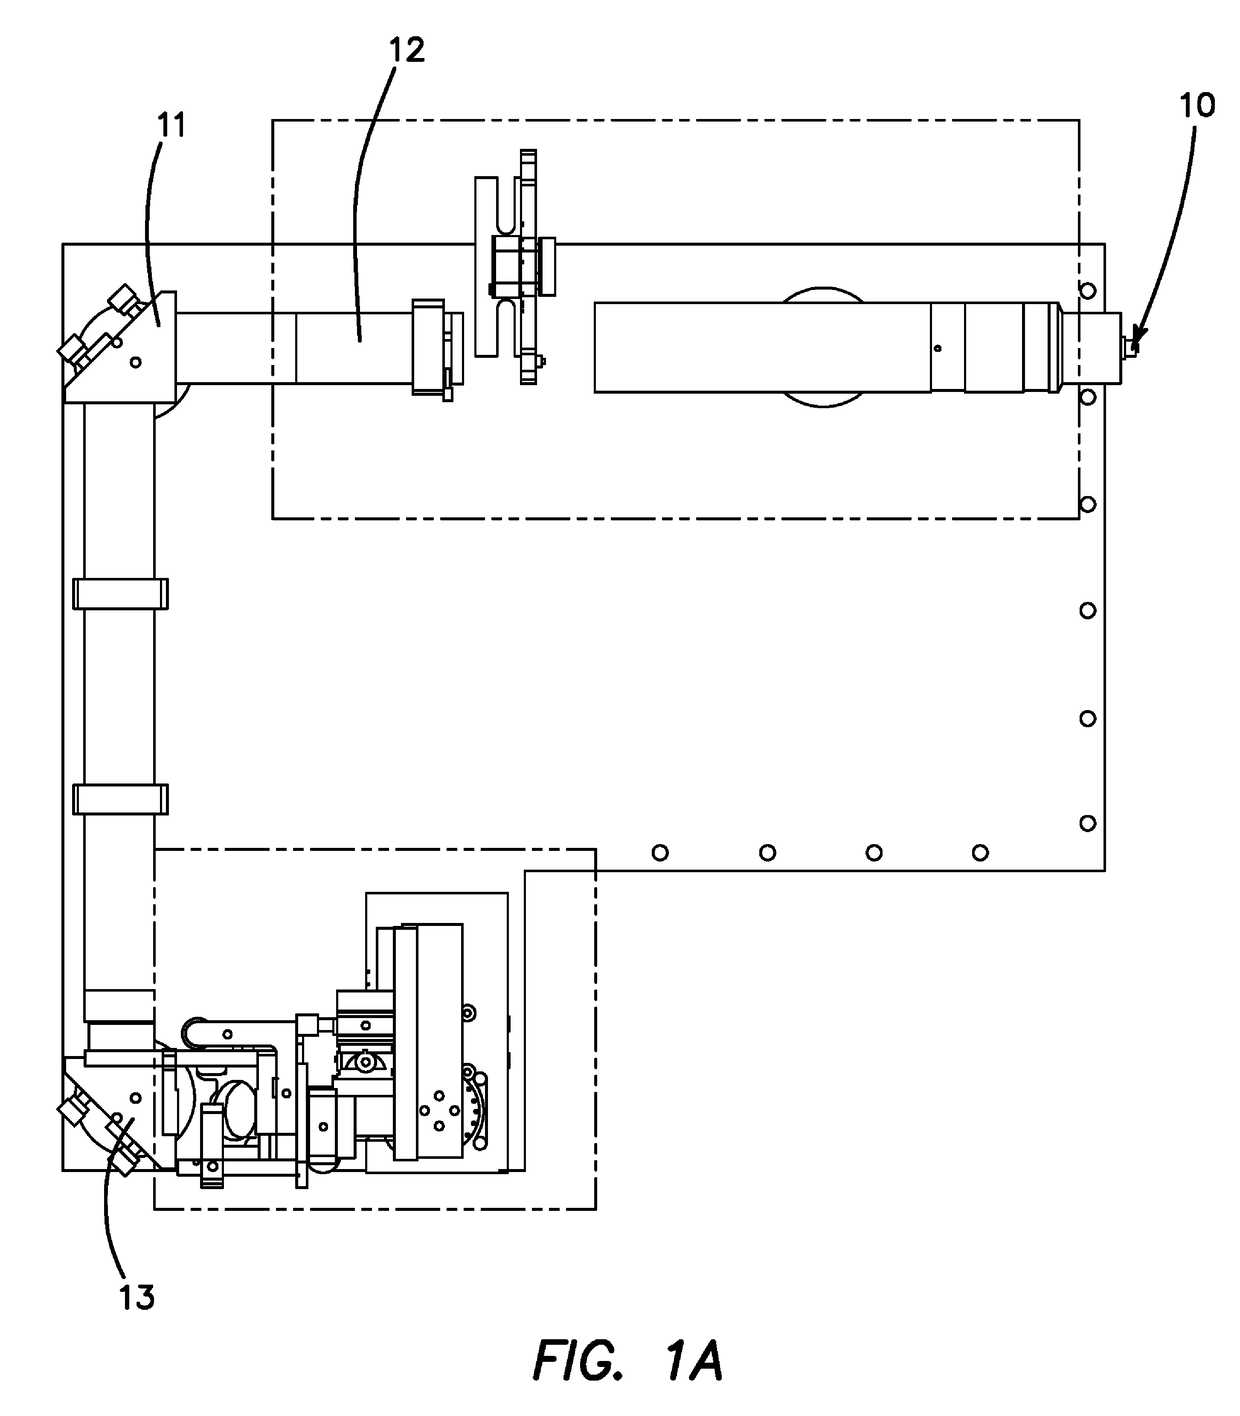 Apparatus and method for an inclined single plane imaging microscope box (iSPIM box)